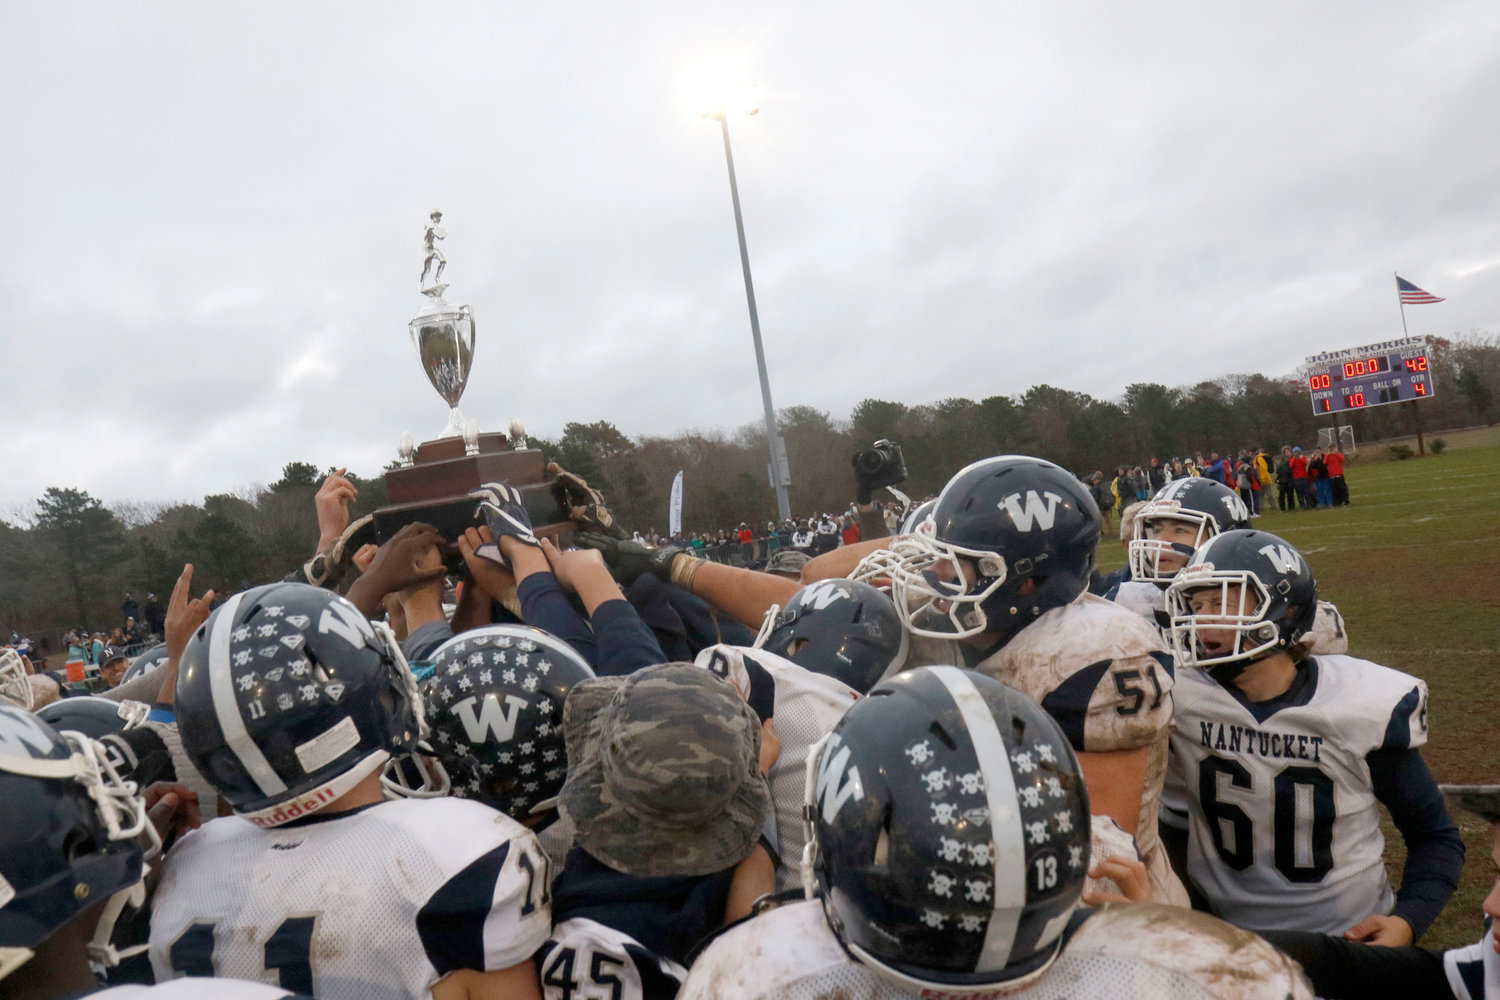 The Whalers celebrate winning the 2019 Island Cup 47-20 on Martha’s Vineyard, the last time the game was played. This year the game is on Nantucket, Saturday at 2 p.m.